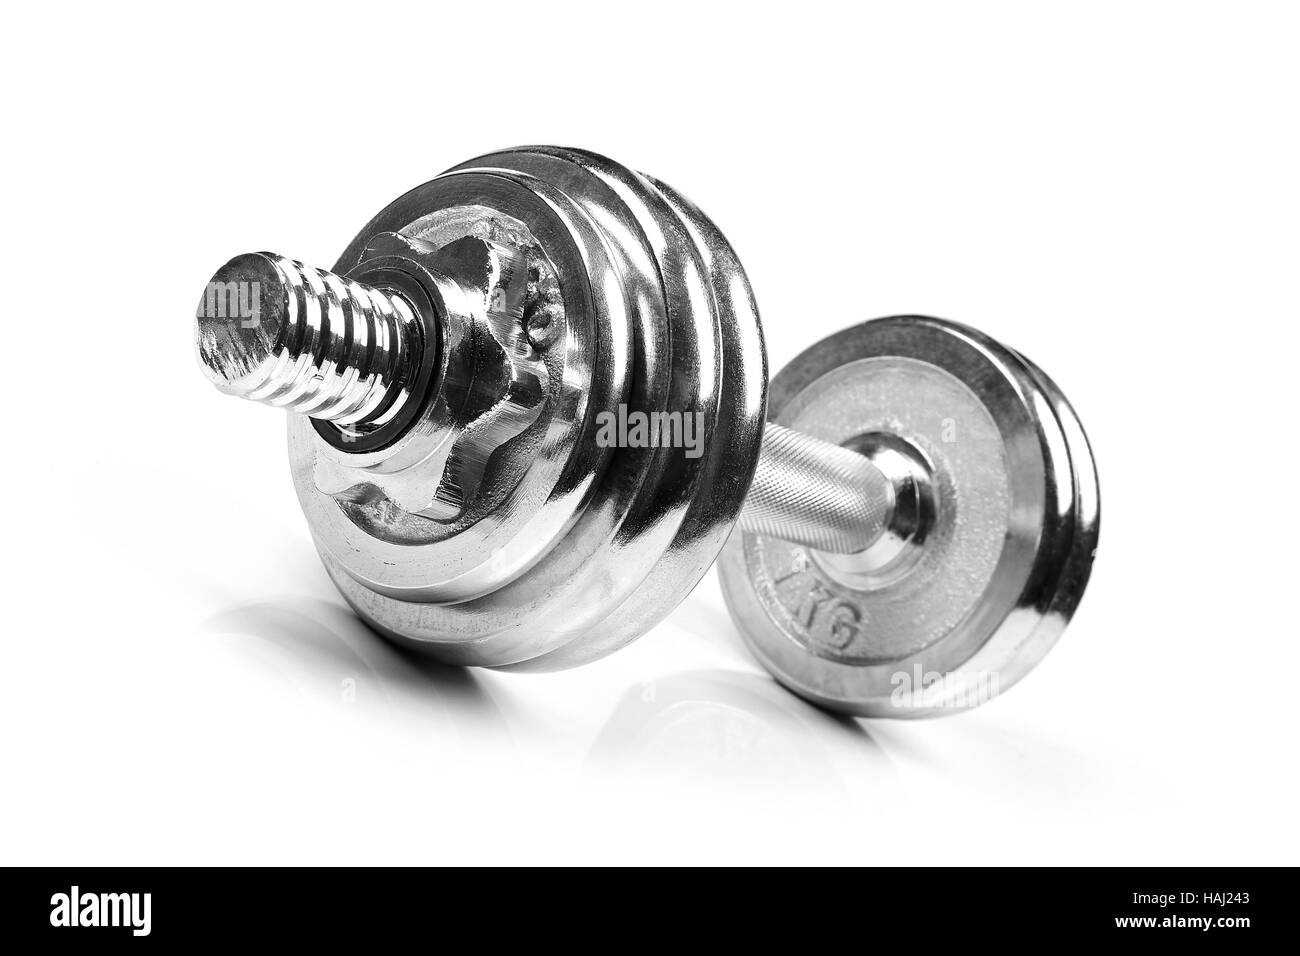 fitness exercise dumbbell weight isolated on white Stock Photo